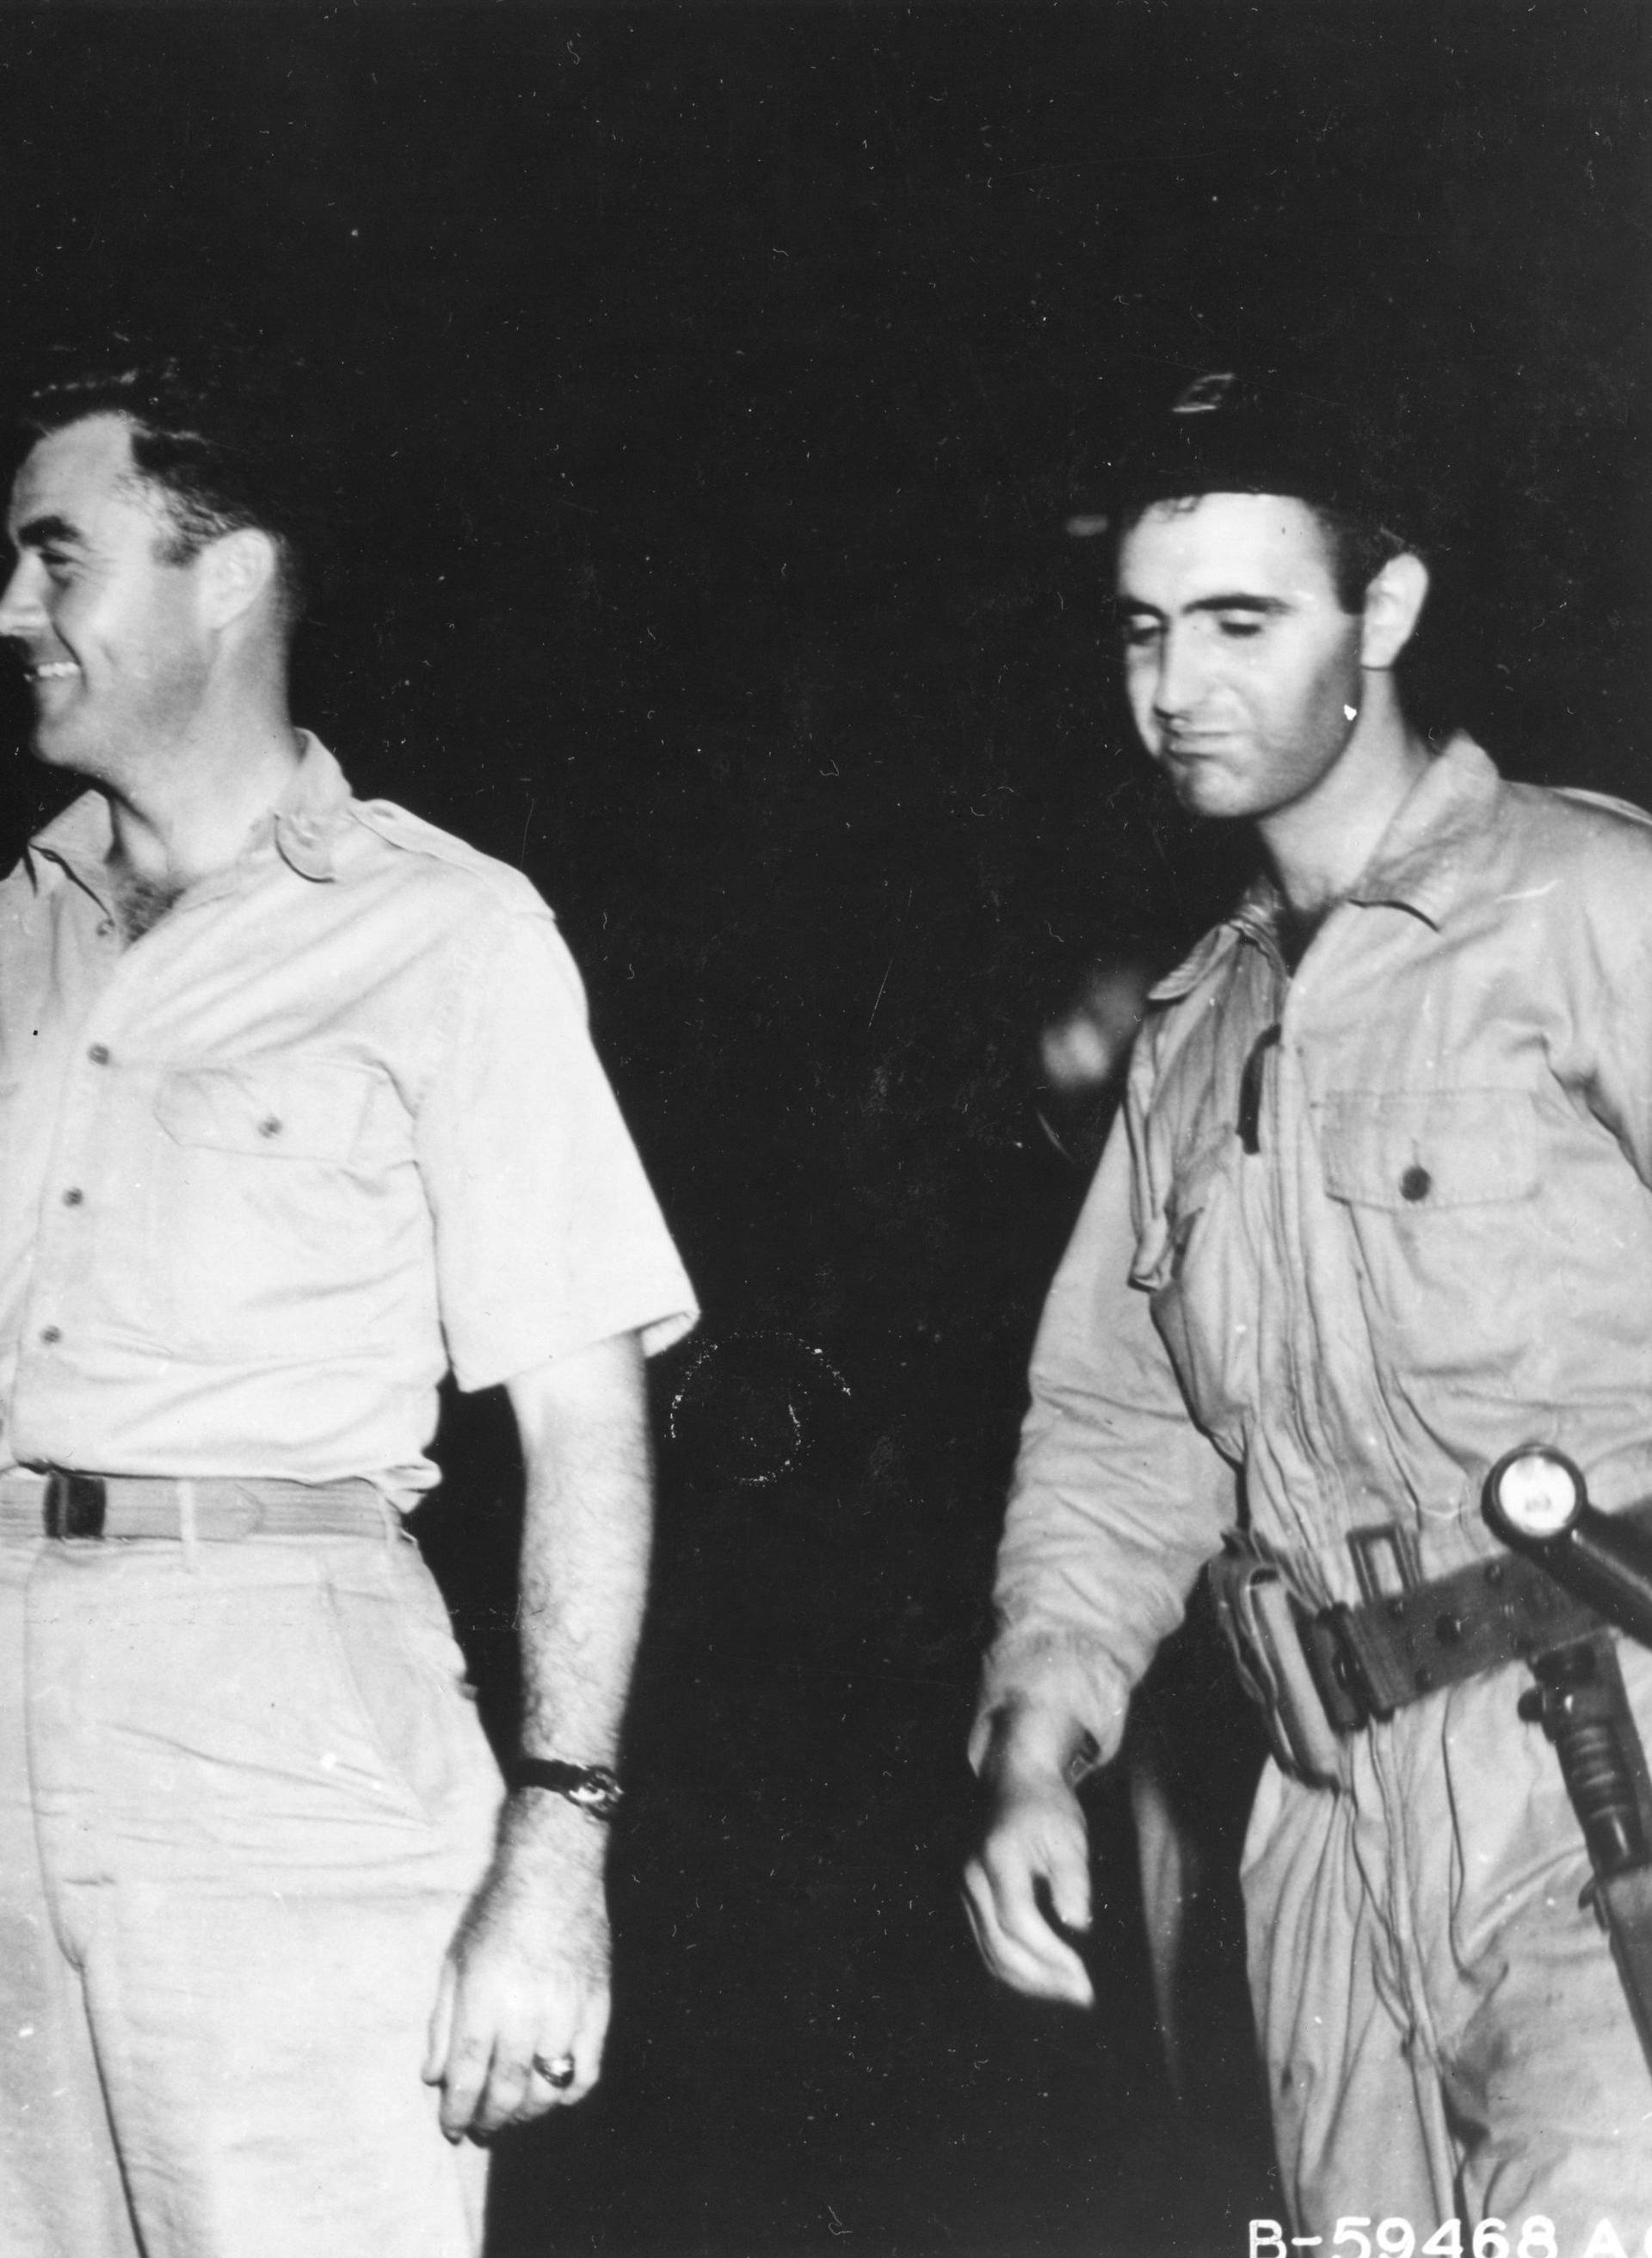 Major Charles W. Sweeney (left), pilot of the B-29 BOCKSCAR which dropped the atomic bomb on Nagasaki on August 9, 1945, is shown before his mission shaking hands with Col Paul W. Tibbets, pilot of ENOLA GAY which atom bombed Hiroshima on 6 August 1945. M